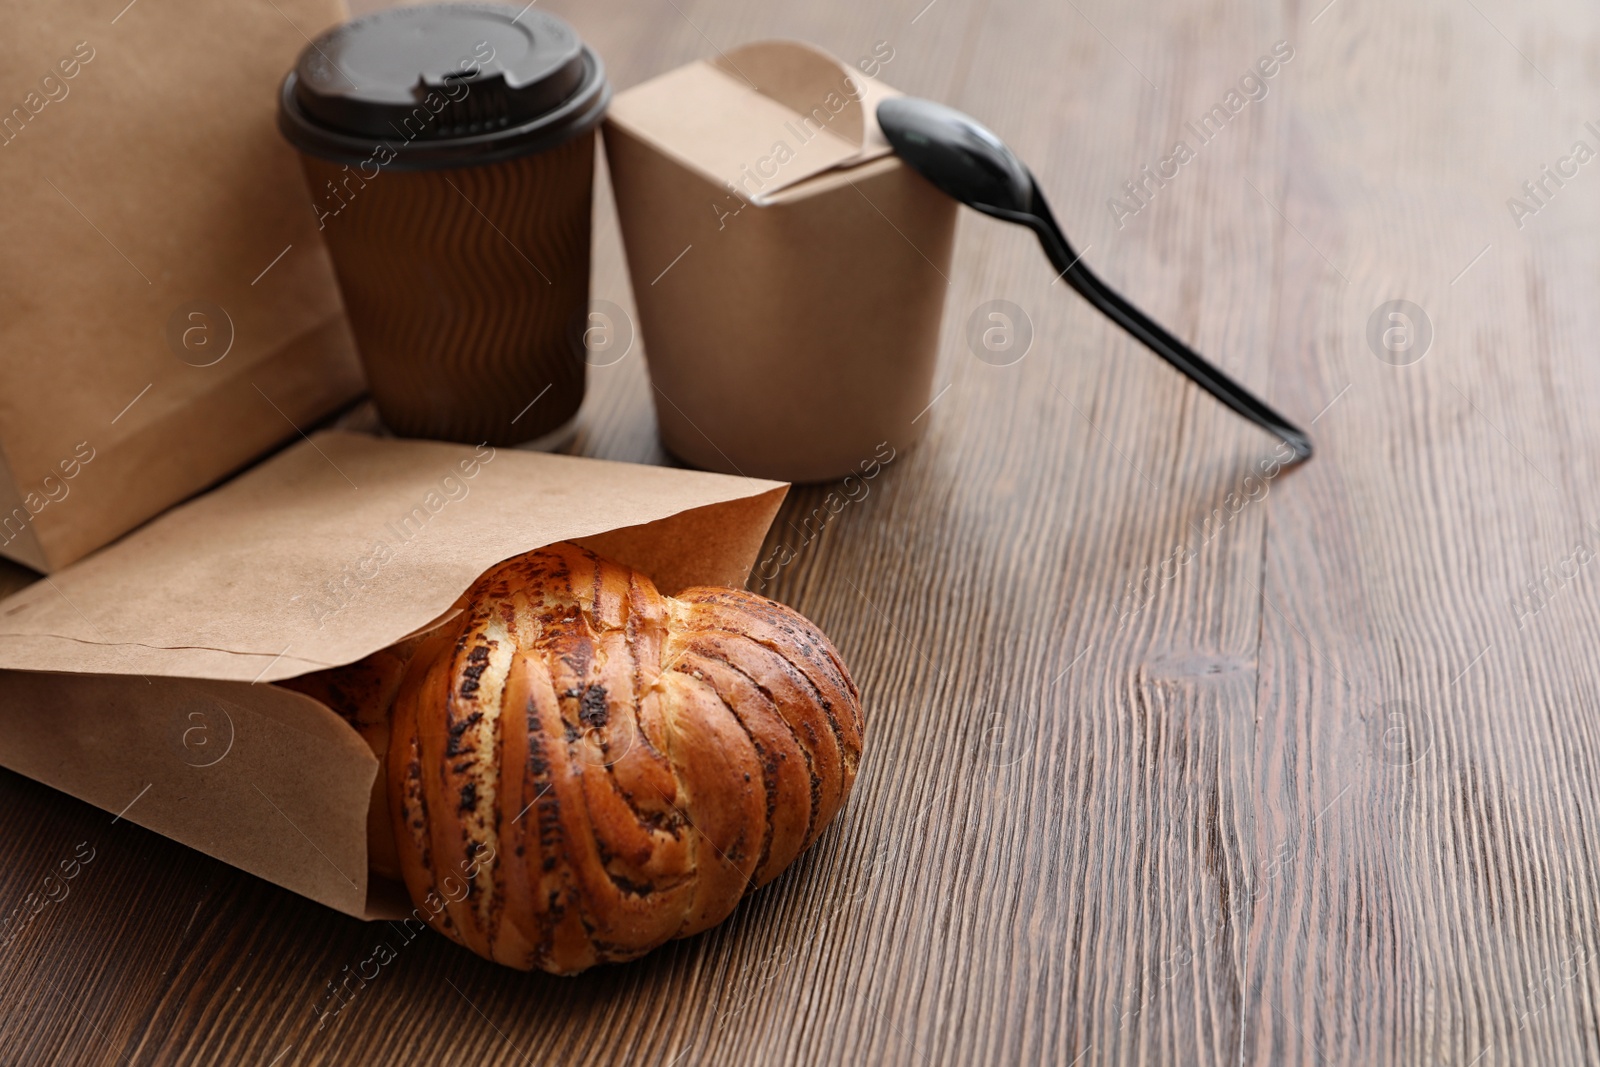 Photo of Bun in paper bag and takeaway food on wooden table. Space for text